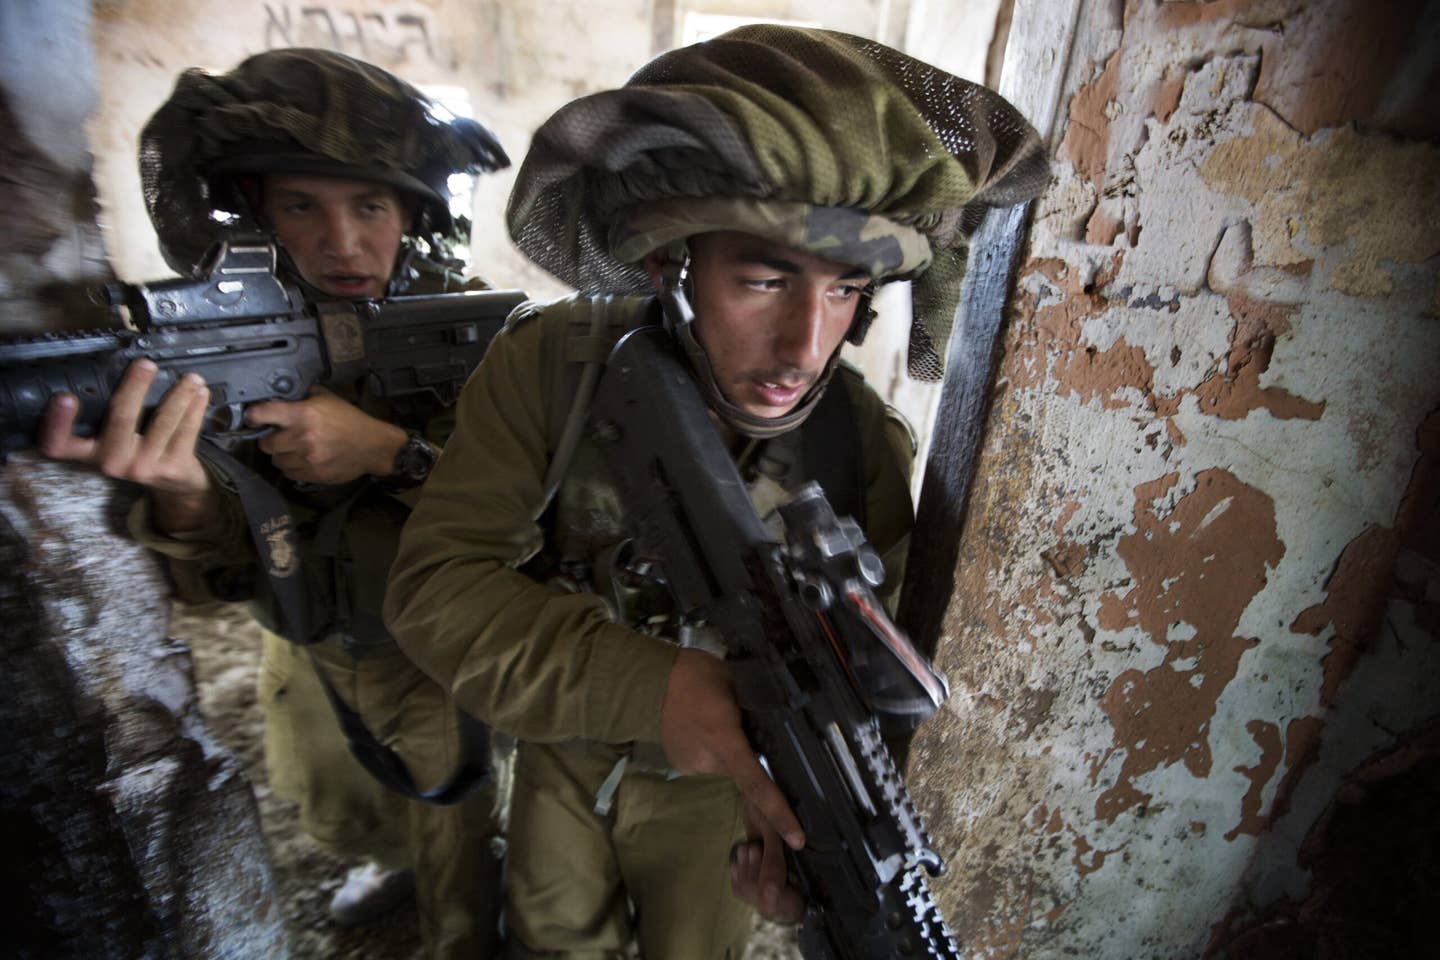 Israeli infantry soldiers of the Golani brigade take part in exercises during their deployment in the Israeli-annexed Golan Heights, near the border with Syria, on May 6, 2013. AFP PHOTO/MENAHEM KAHANA (Photo by MENAHEM KAHANA / AFP) (Photo by MENAHEM KAHANA/AFP via Getty Images)